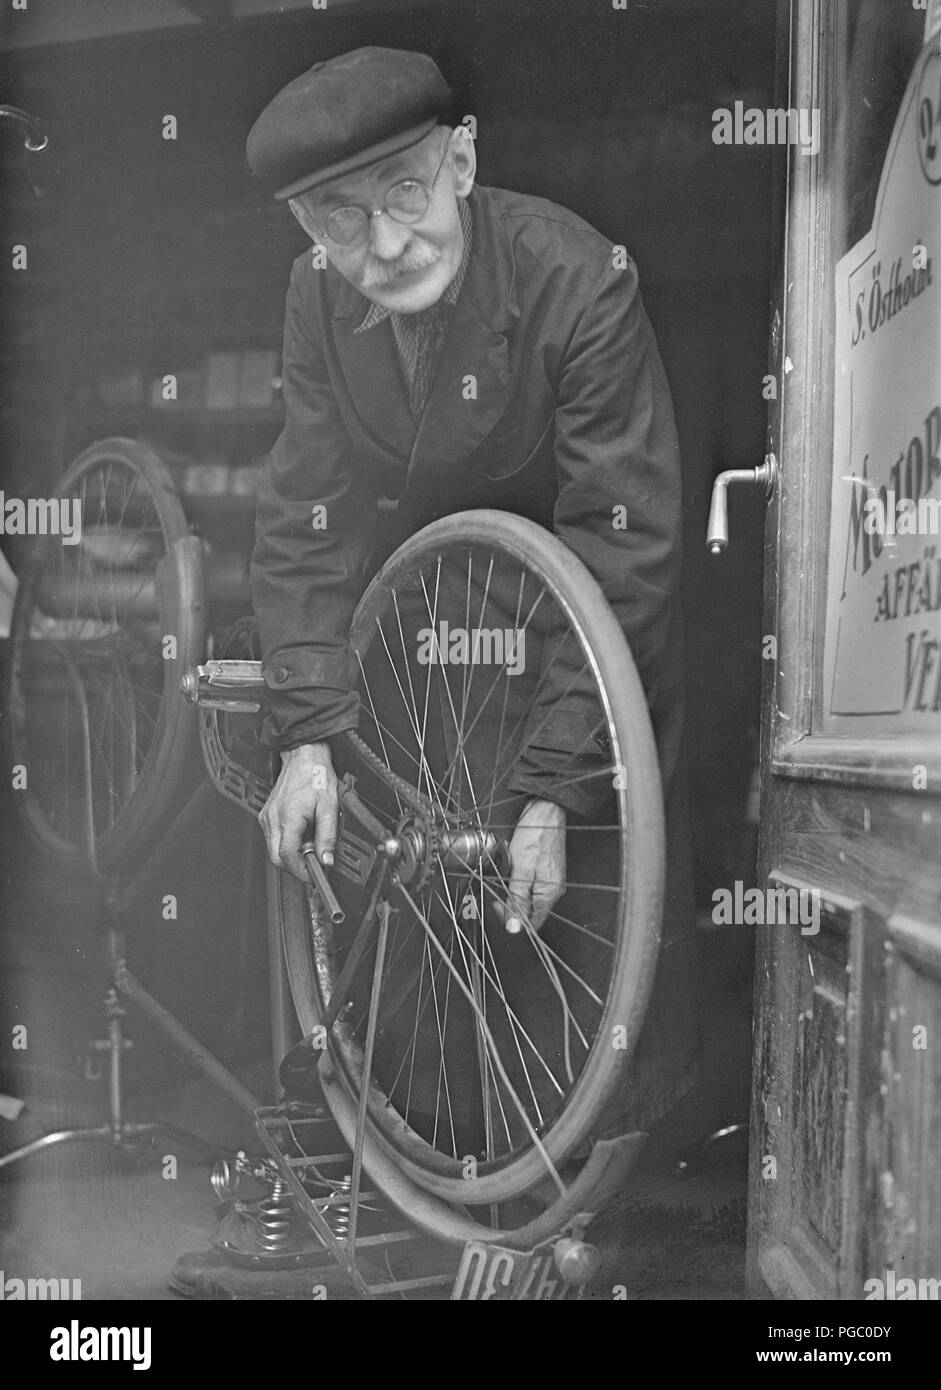 1940s Bicycle Repair Man An Elderly Man In The Doorway Of His Bicycle Repair Shop He Has Bicycle Upside Down And Is Working On Removing The Back Wheel Sweden May 1940 Photo